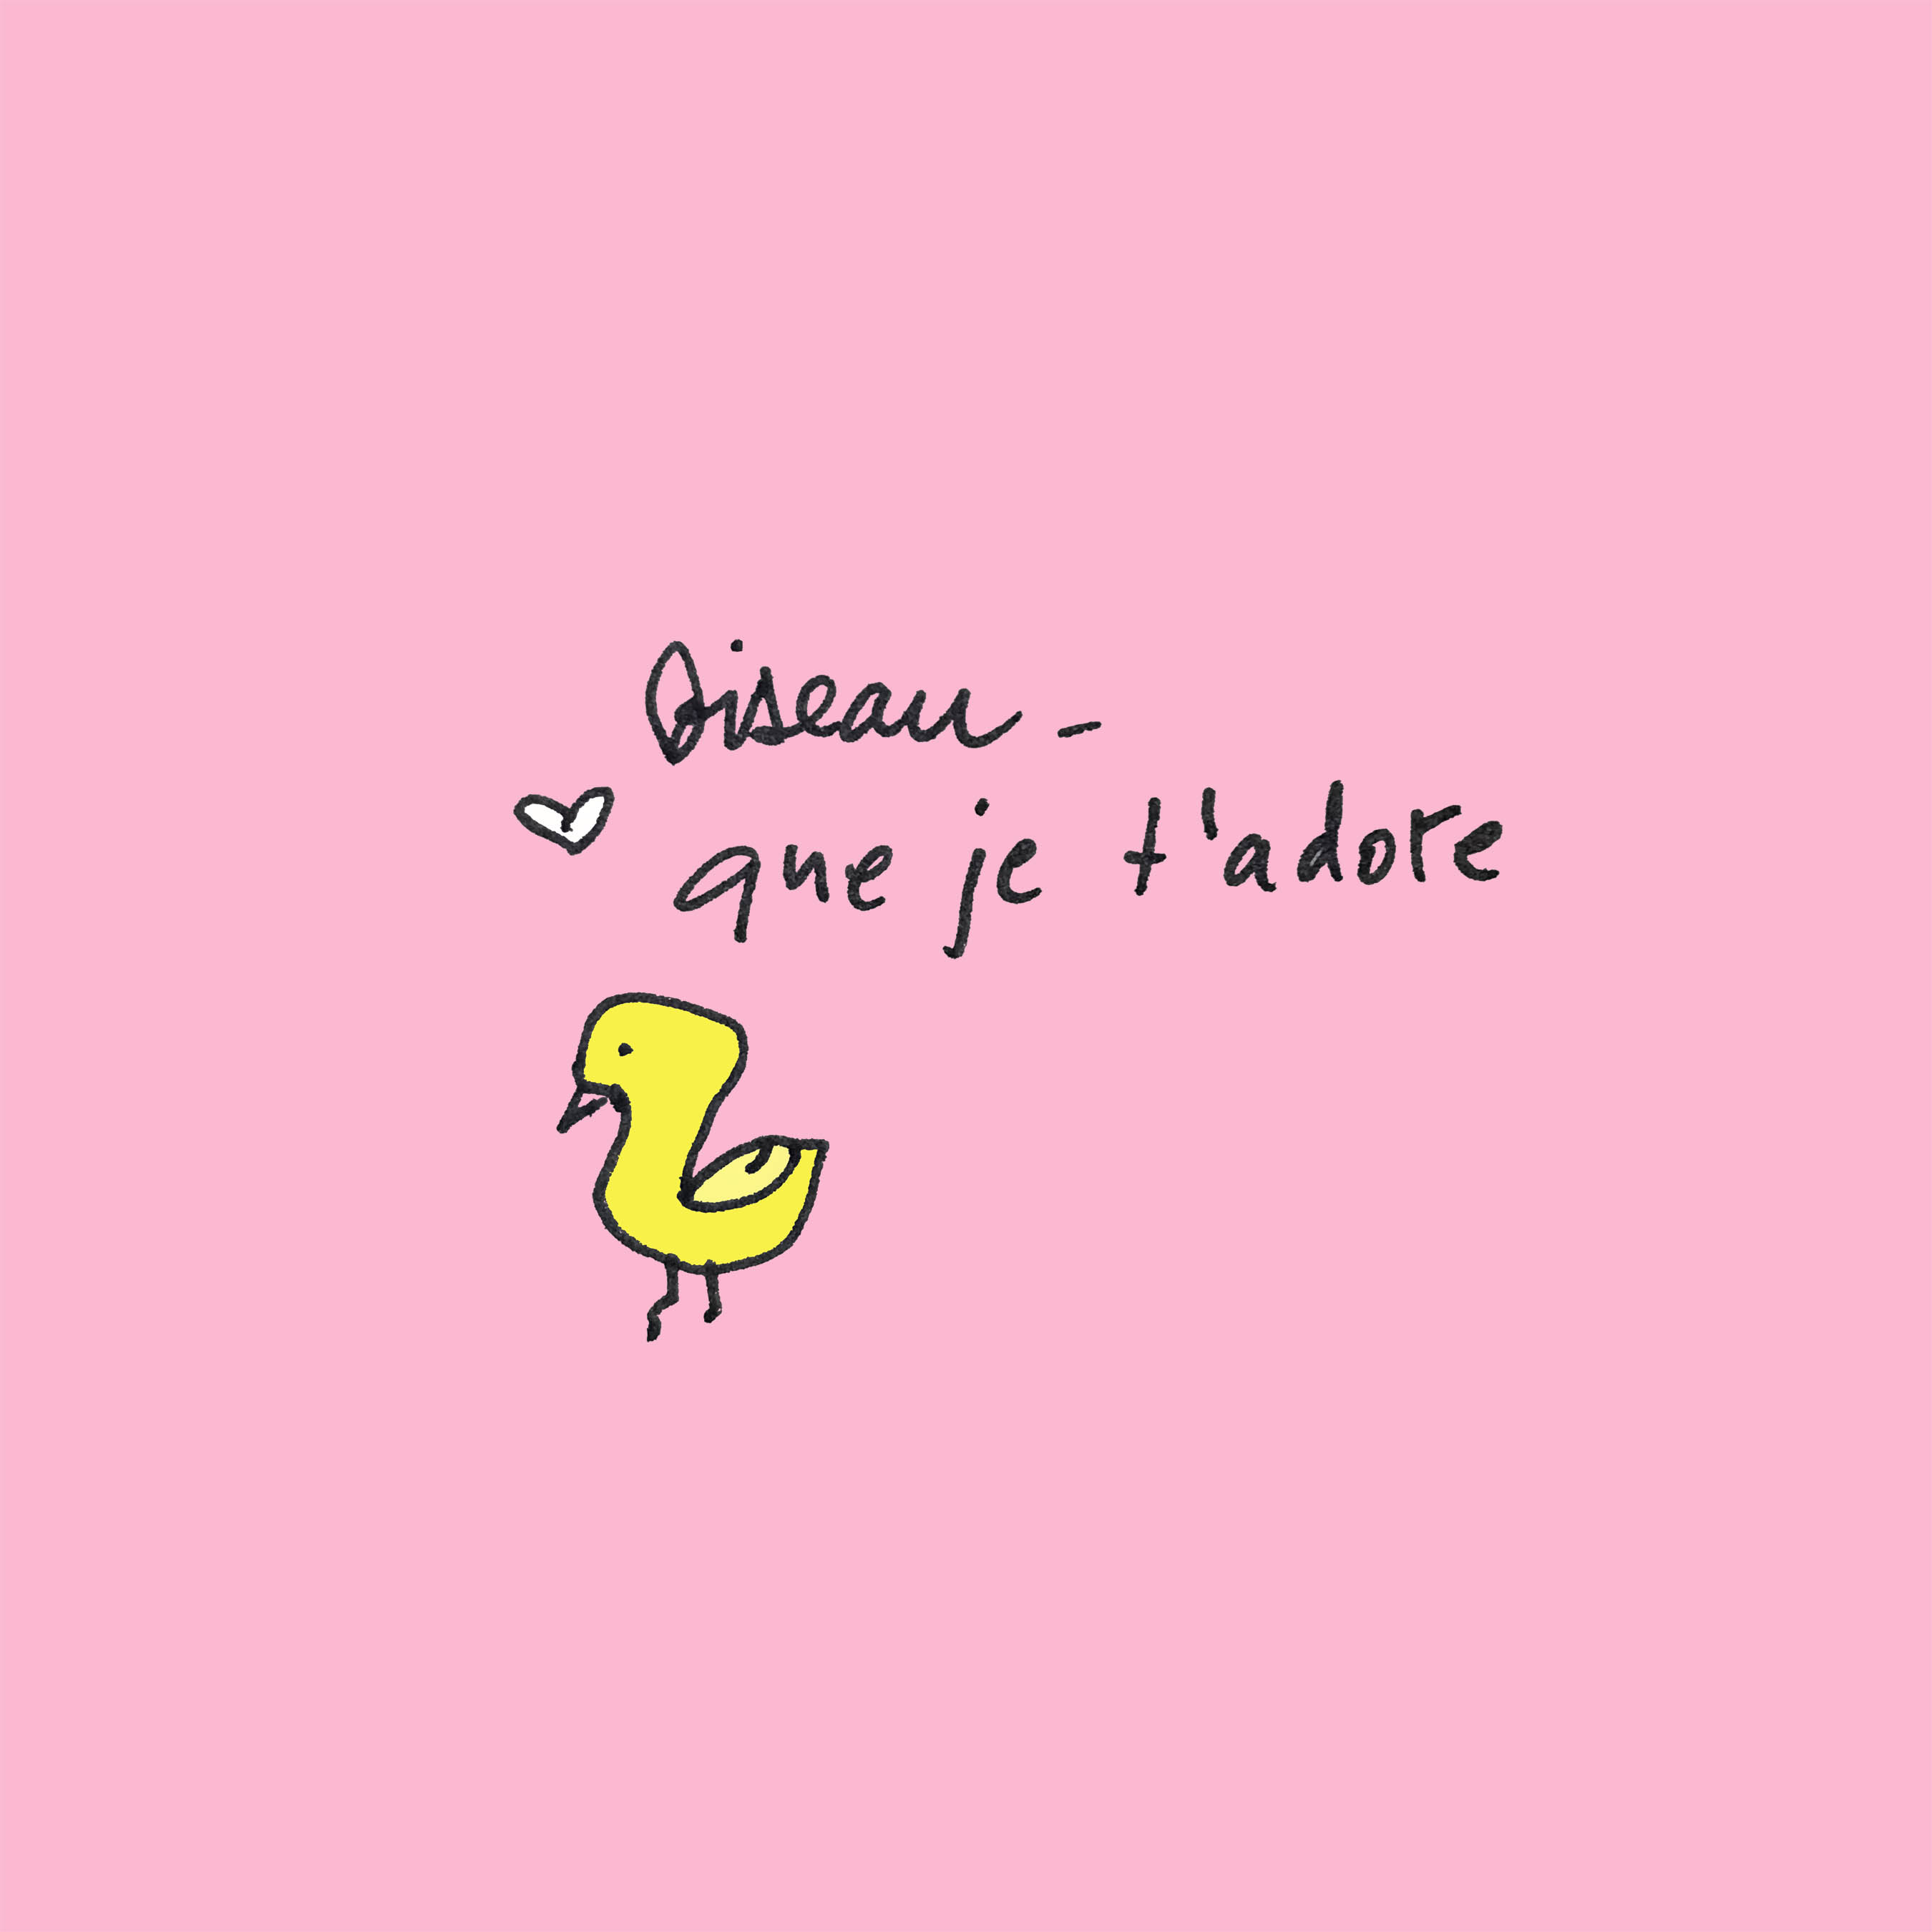 oiseau que je t'adore art every day number 397 bird yellow pink